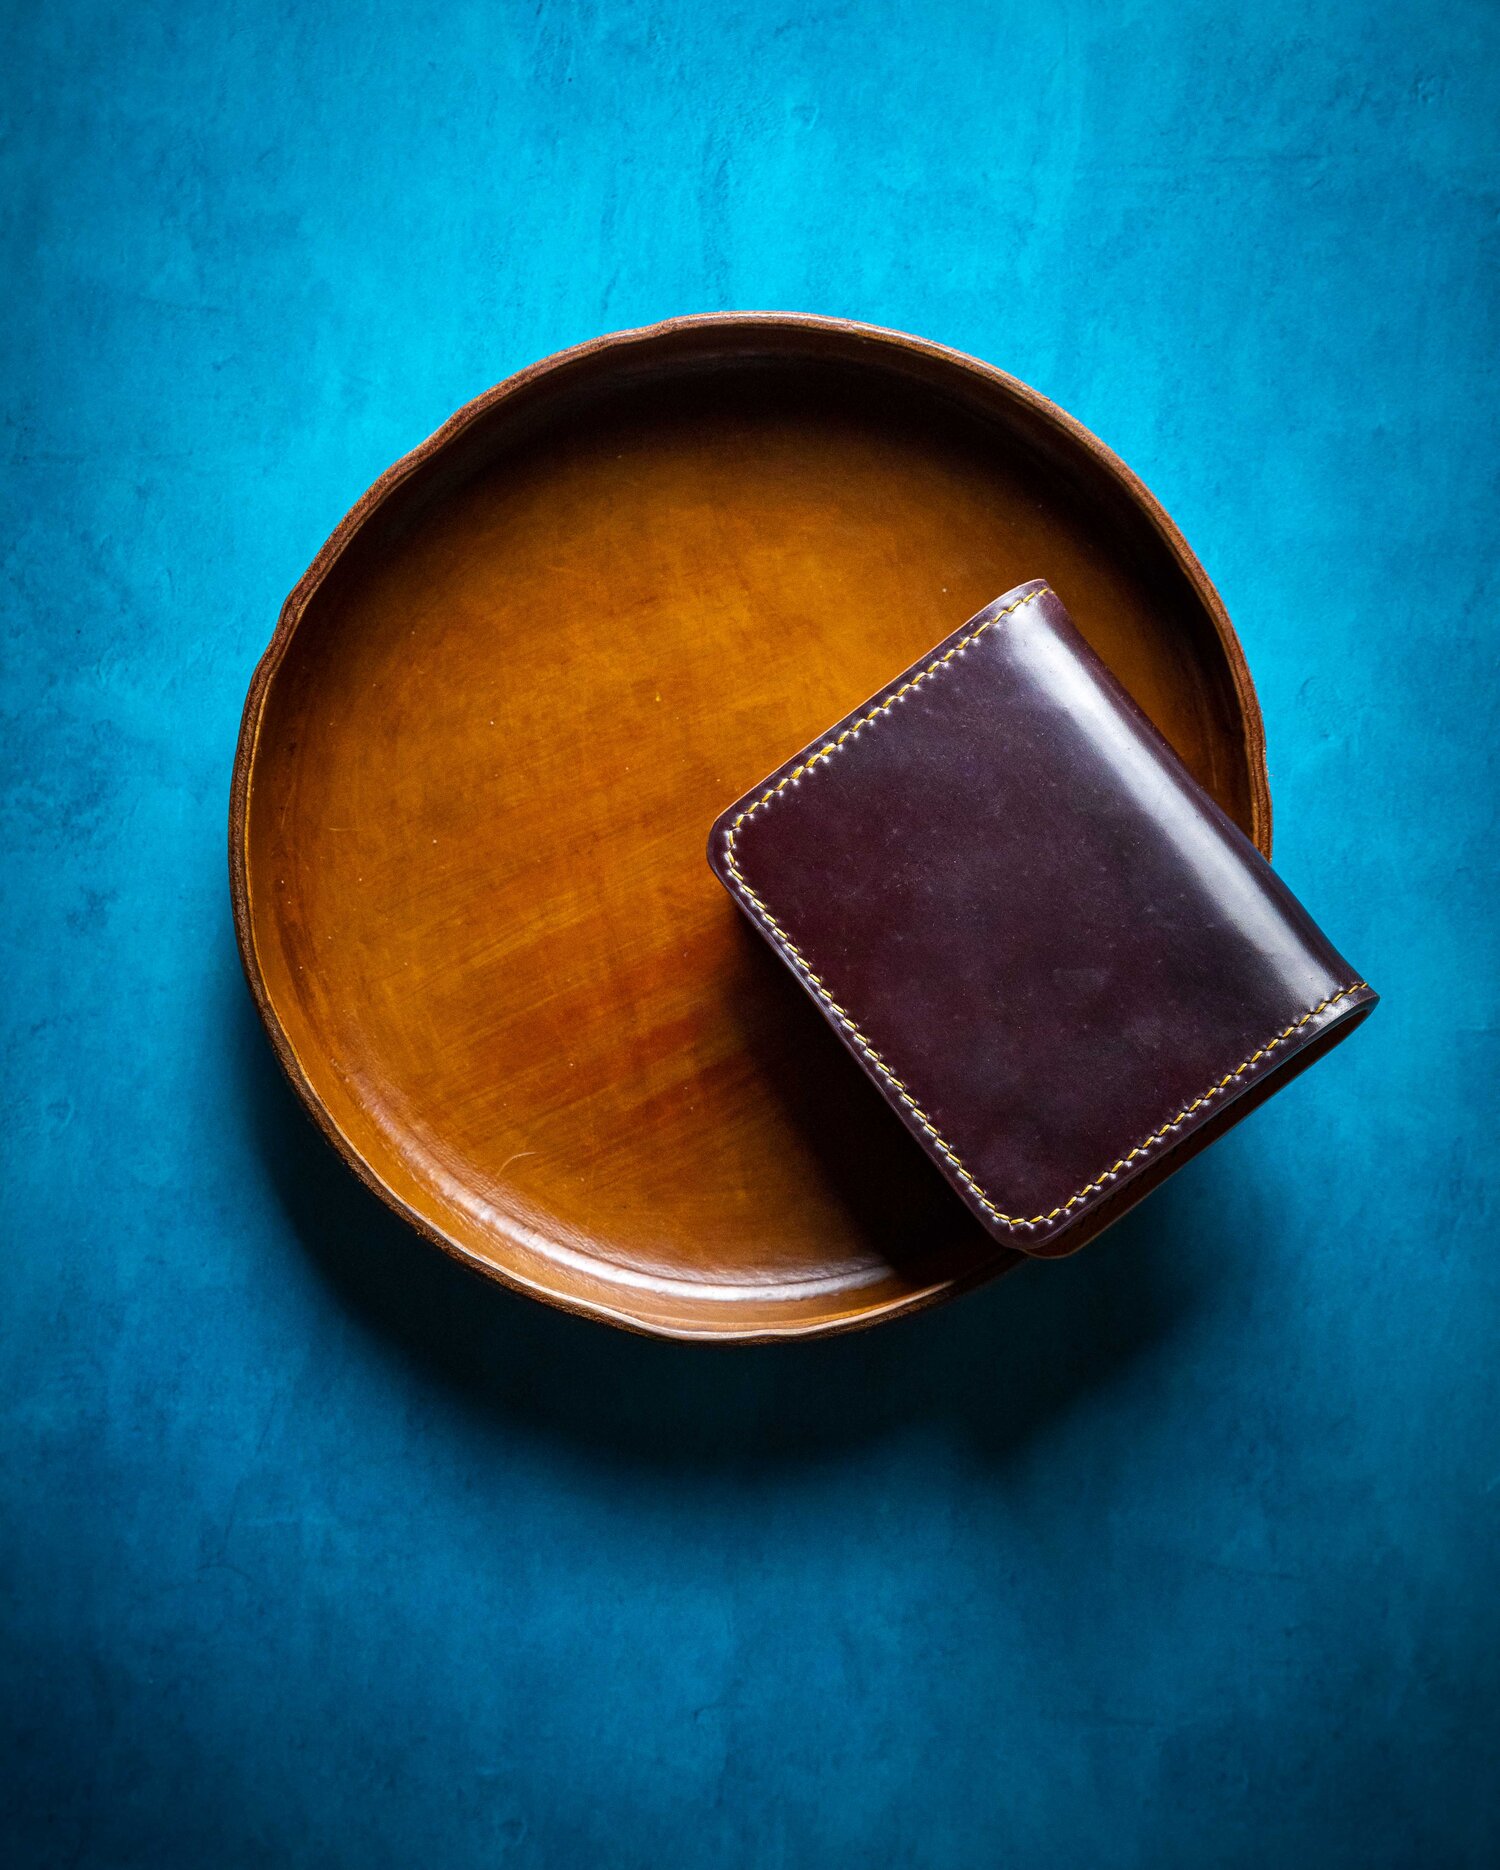 Blue Shell Cordovan Bifold Wallet With Black Buttero Interior